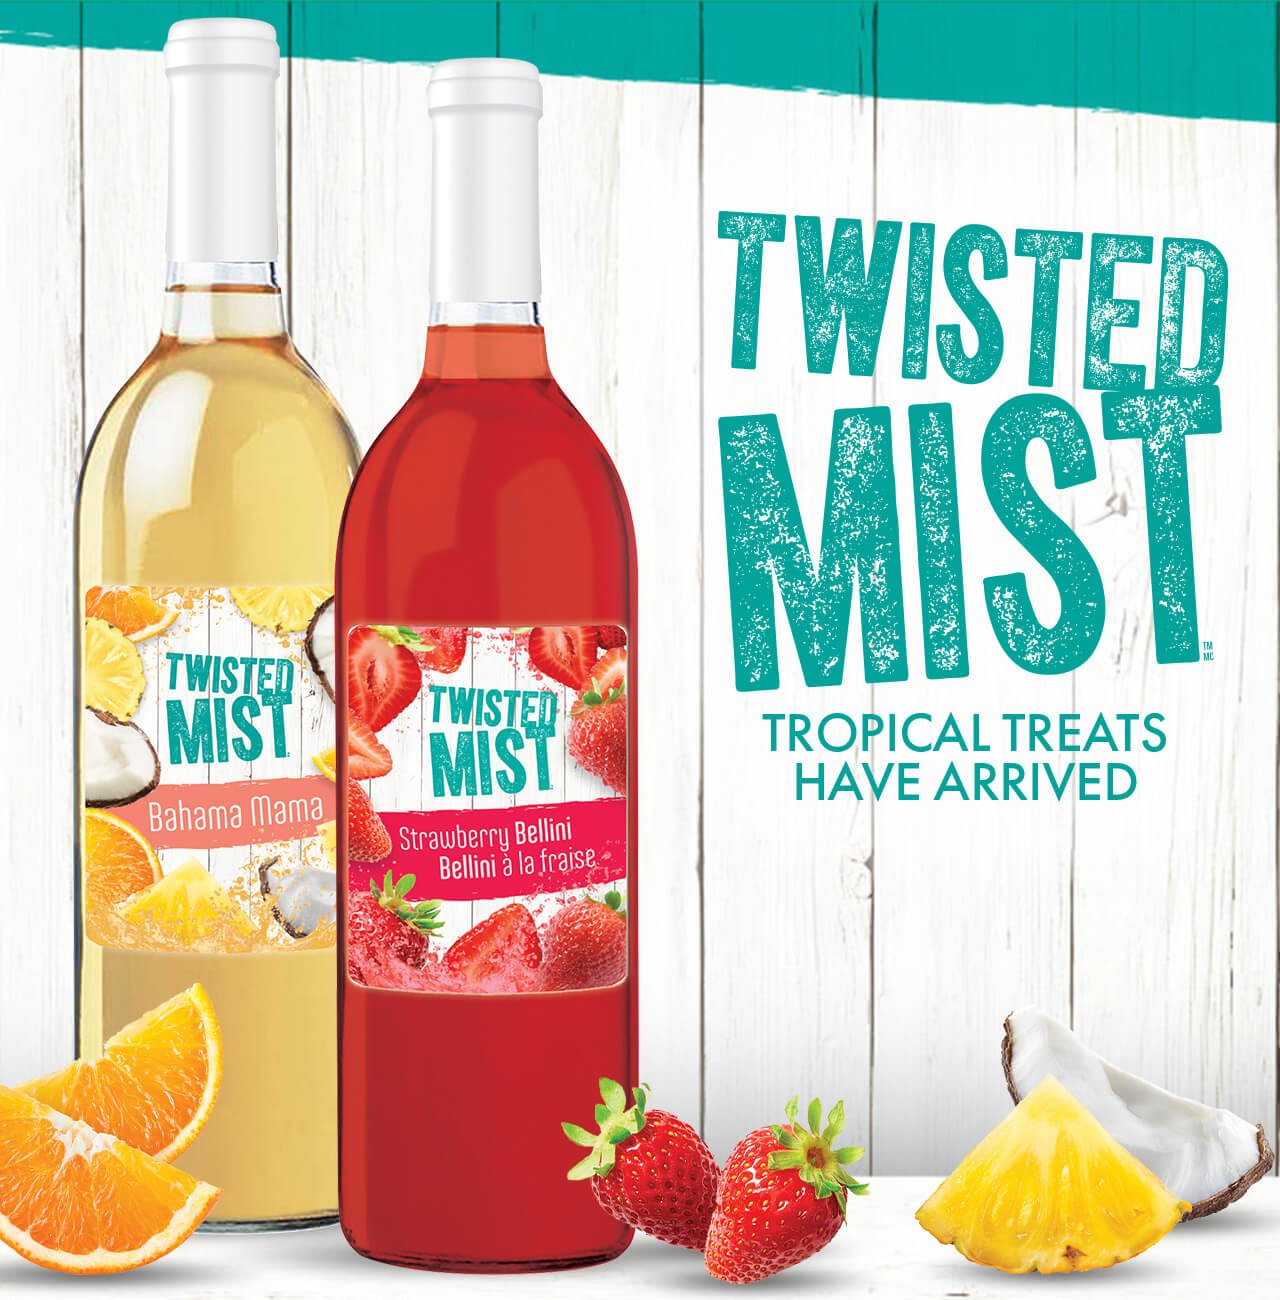 Winexpert Twisted Mist. Tropical Treats Have Arrived